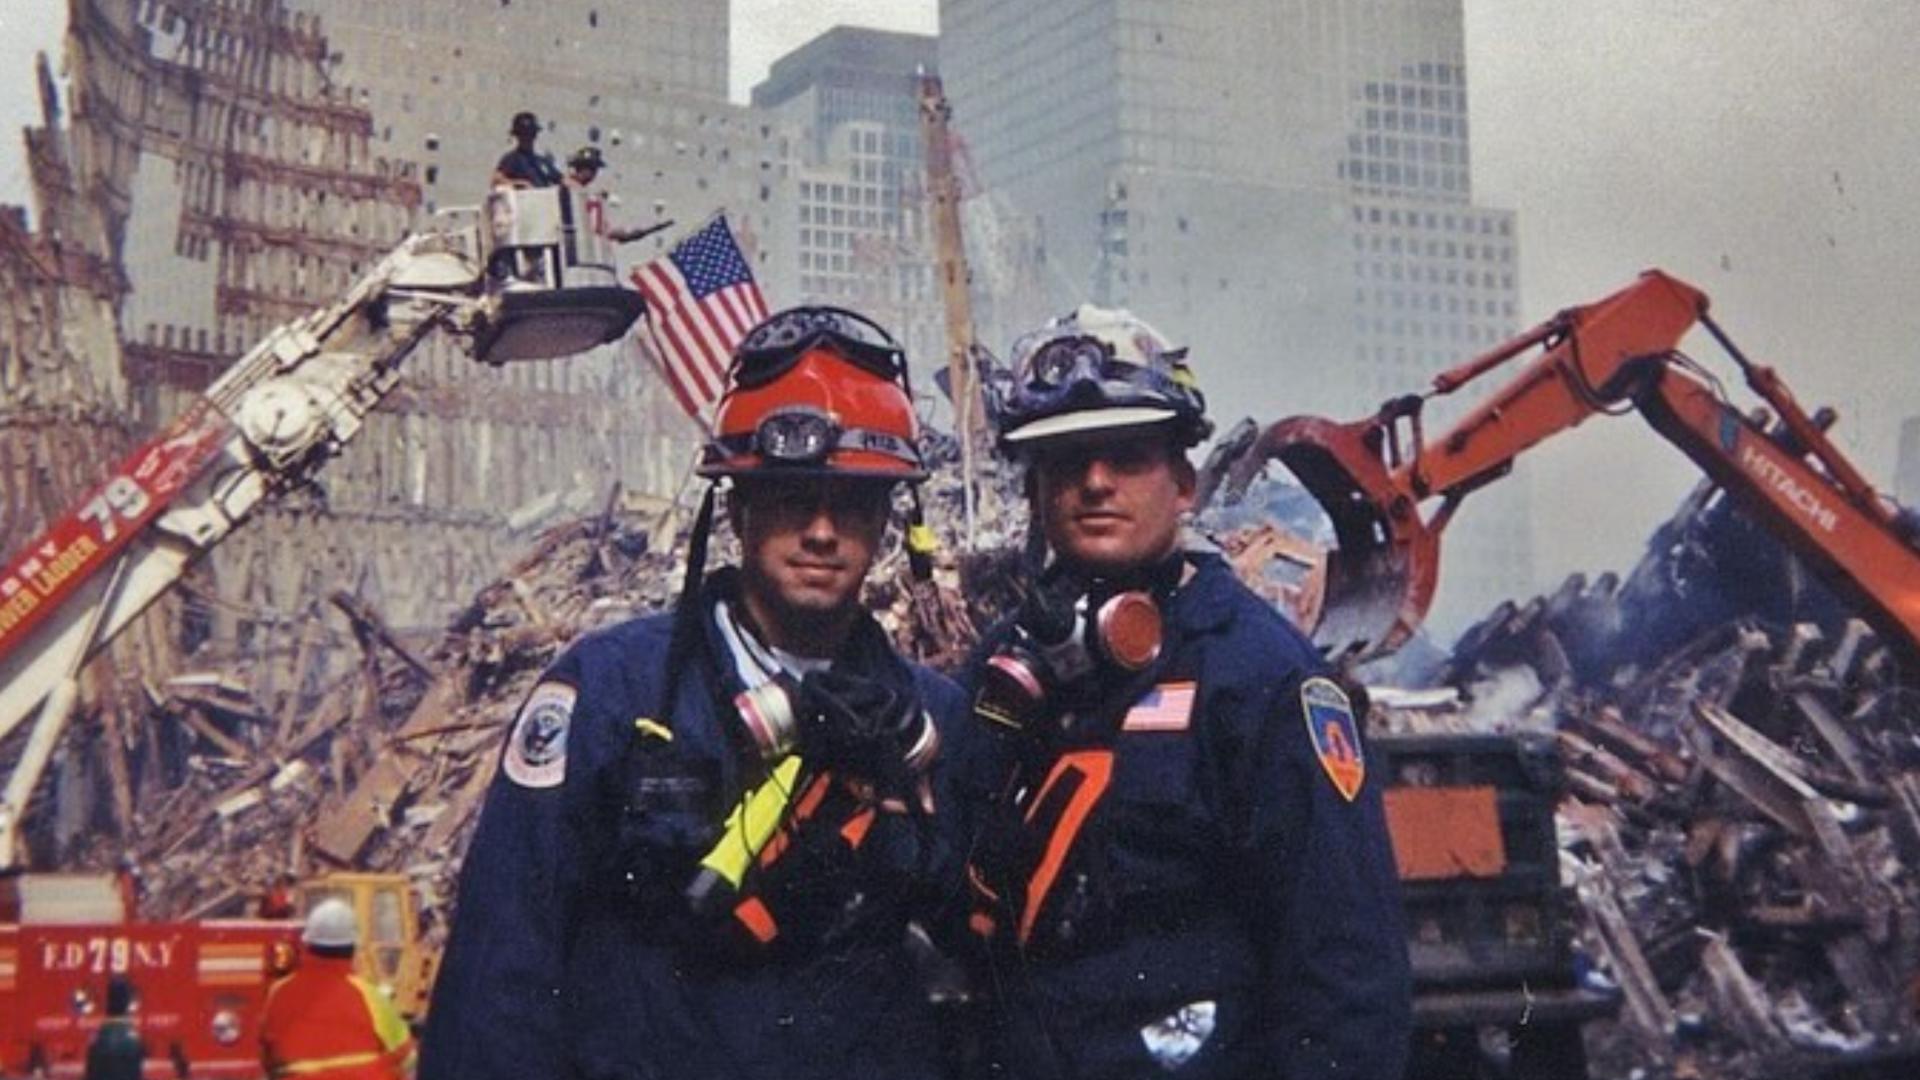 Captain Michael Harp was a 27-year veteran with the Salt Lake City Fire Department, and was deployed to Ground Zero after the 9/11 terror attacks.